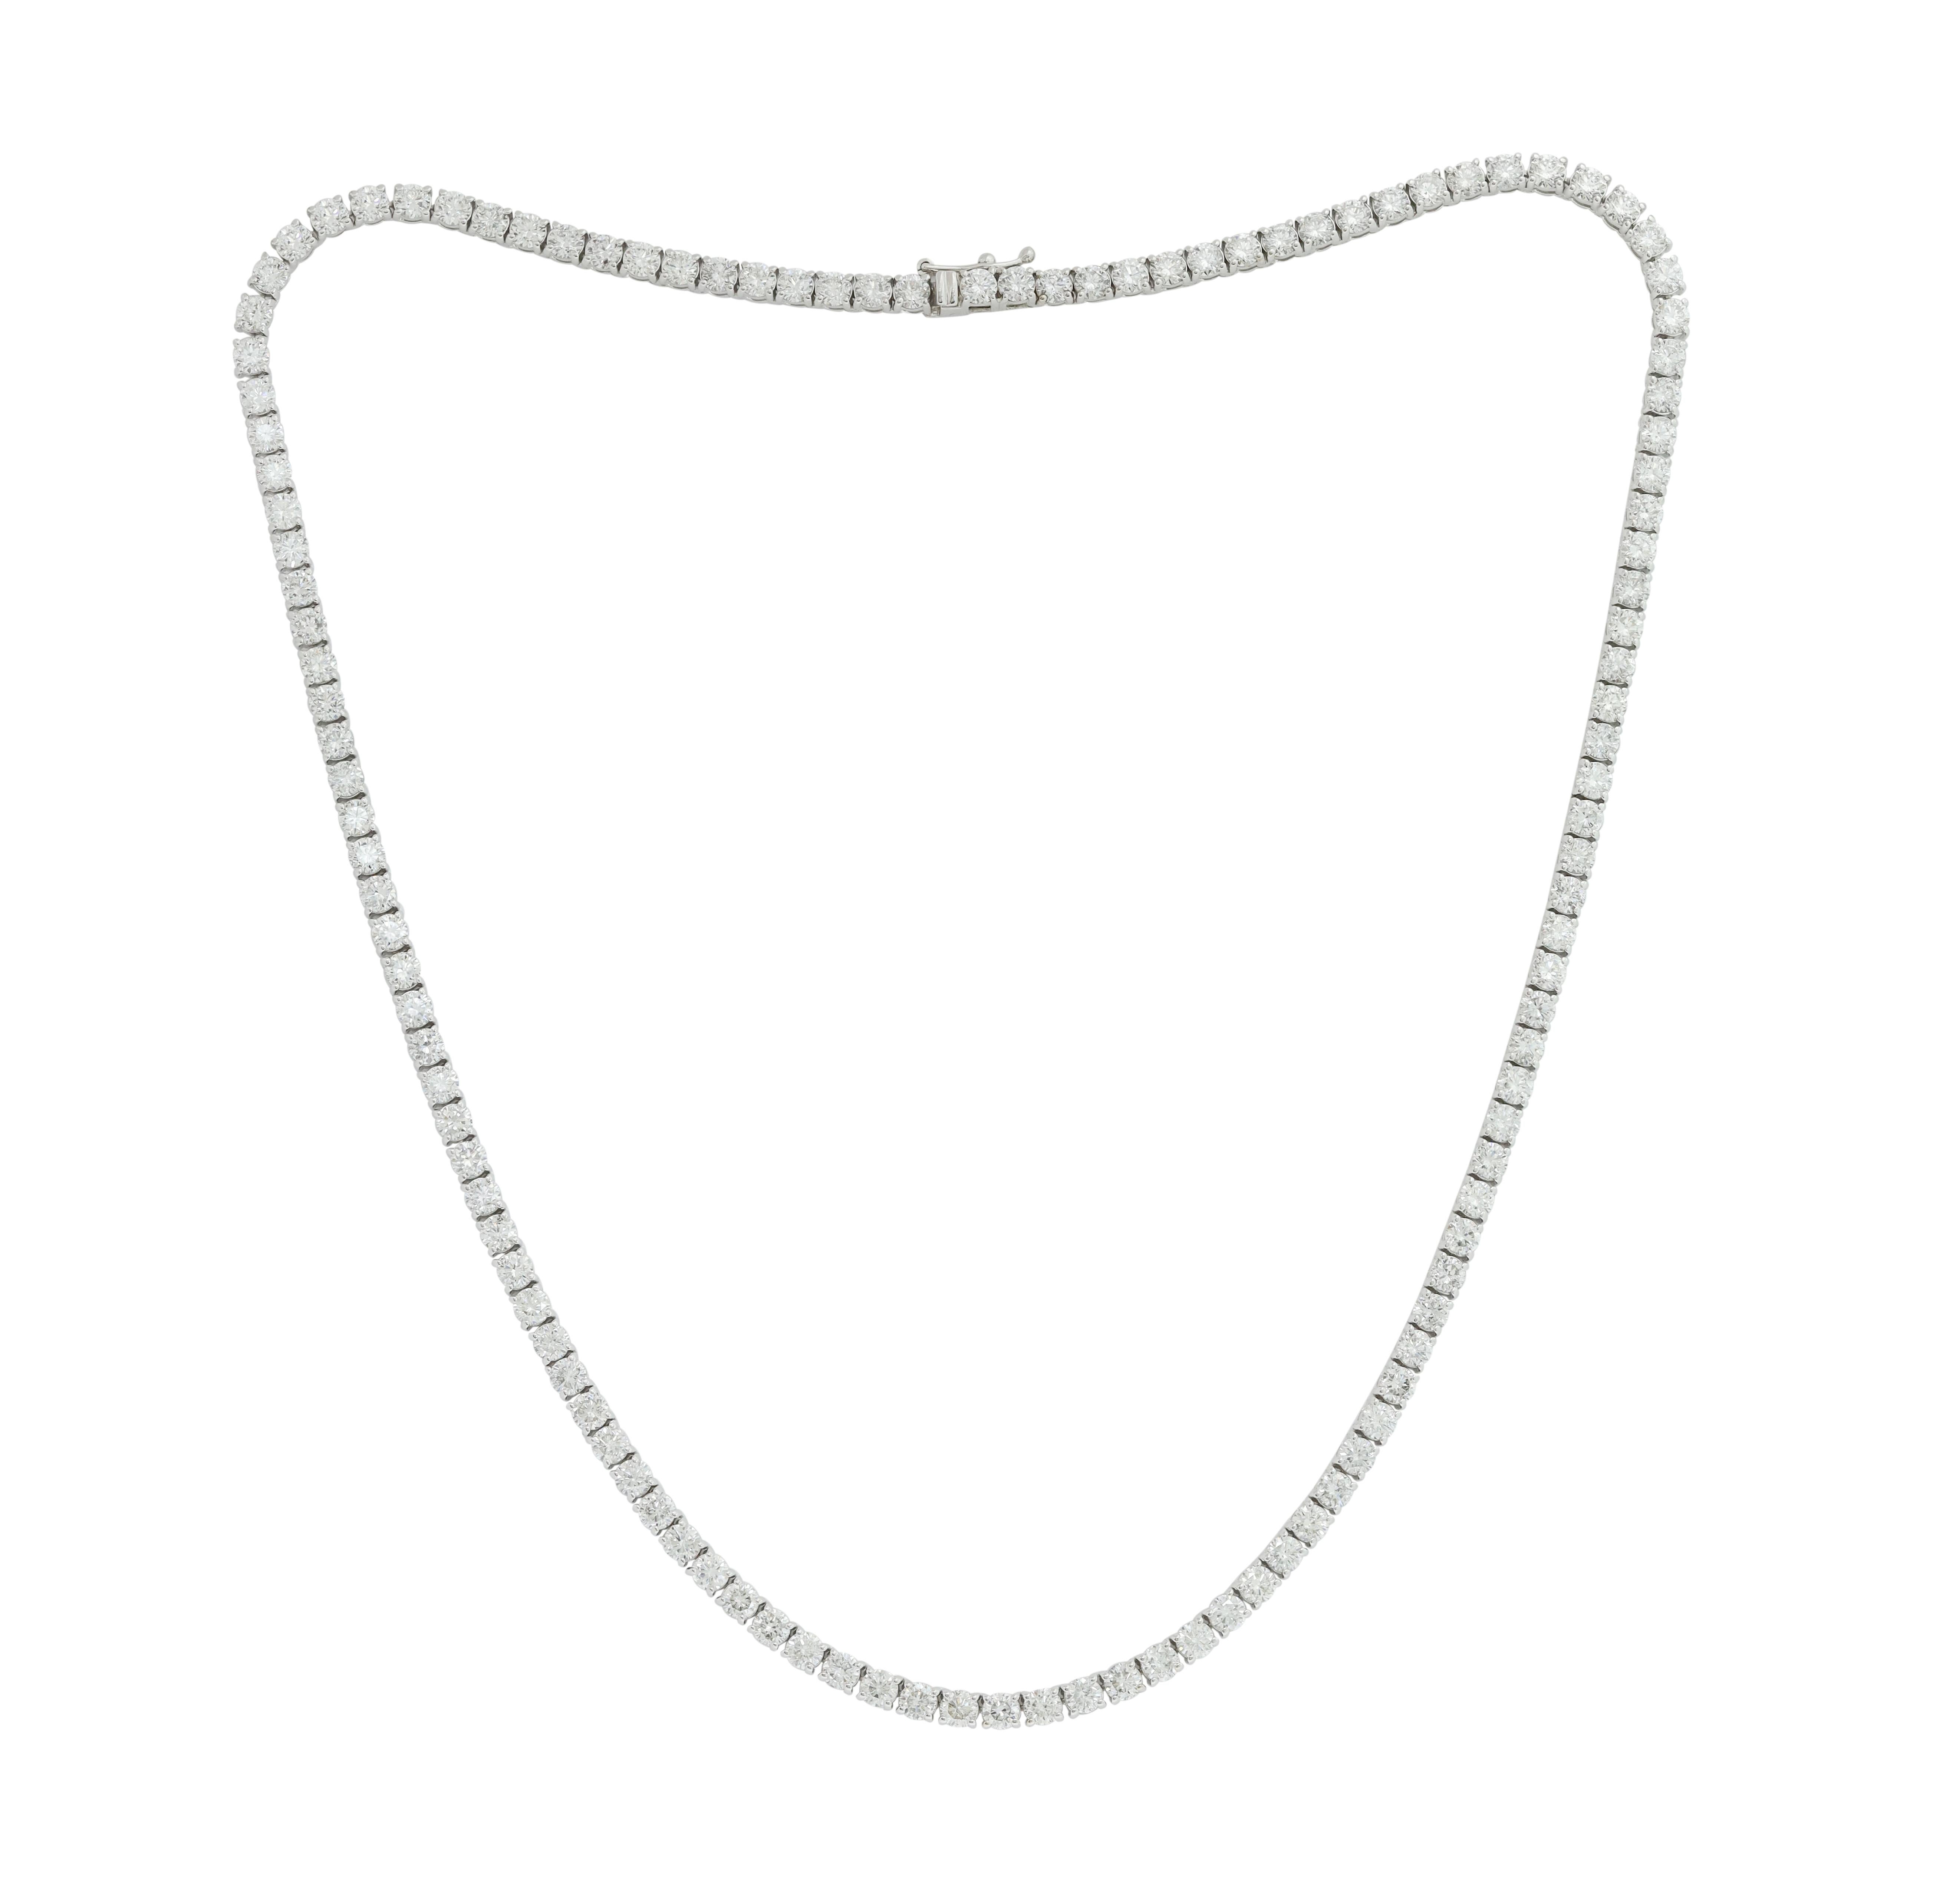 14K White Gold Diamond Straight Line Tennis Necklace Features 13.00Cts of Diamonds. Diana M. is a leading supplier of top-quality fine jewelry for over 35 years.
Diana M is one-stop shop for all your jewelry shopping, carrying line of diamond rings,